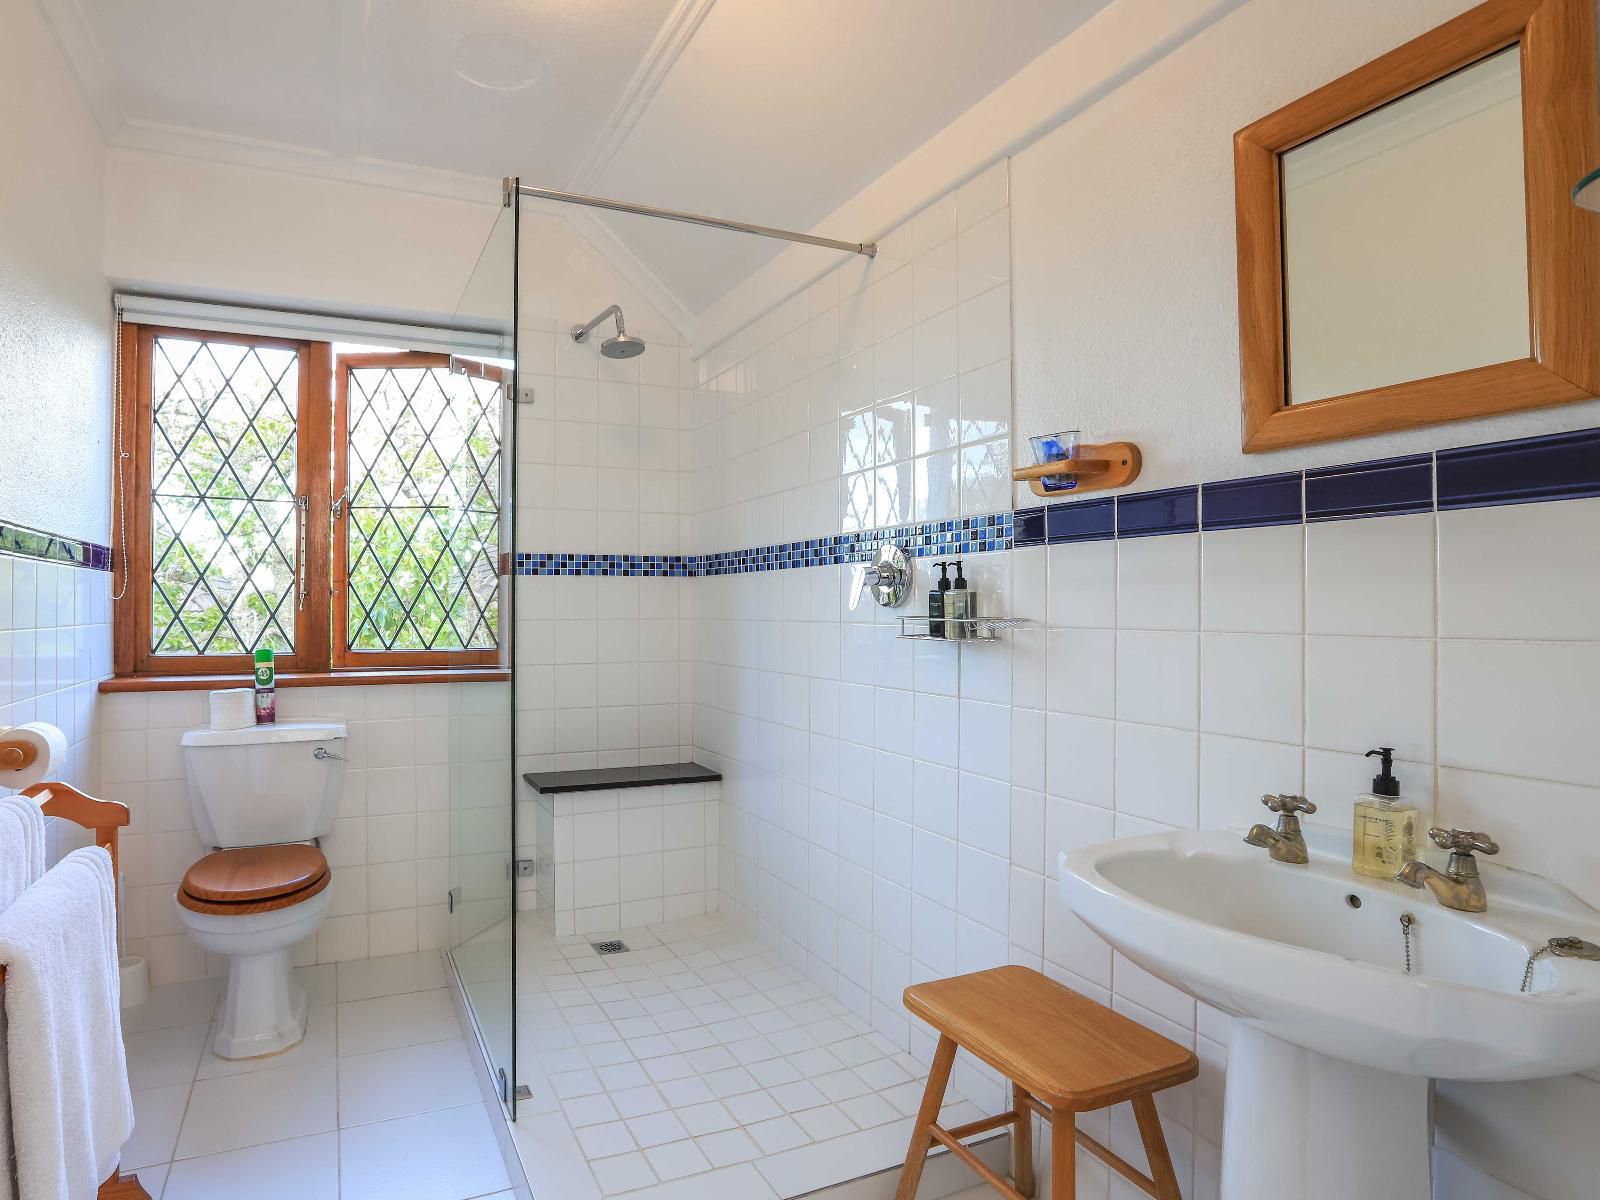 Knightsbury Rondebosch Cape Town Western Cape South Africa Bathroom